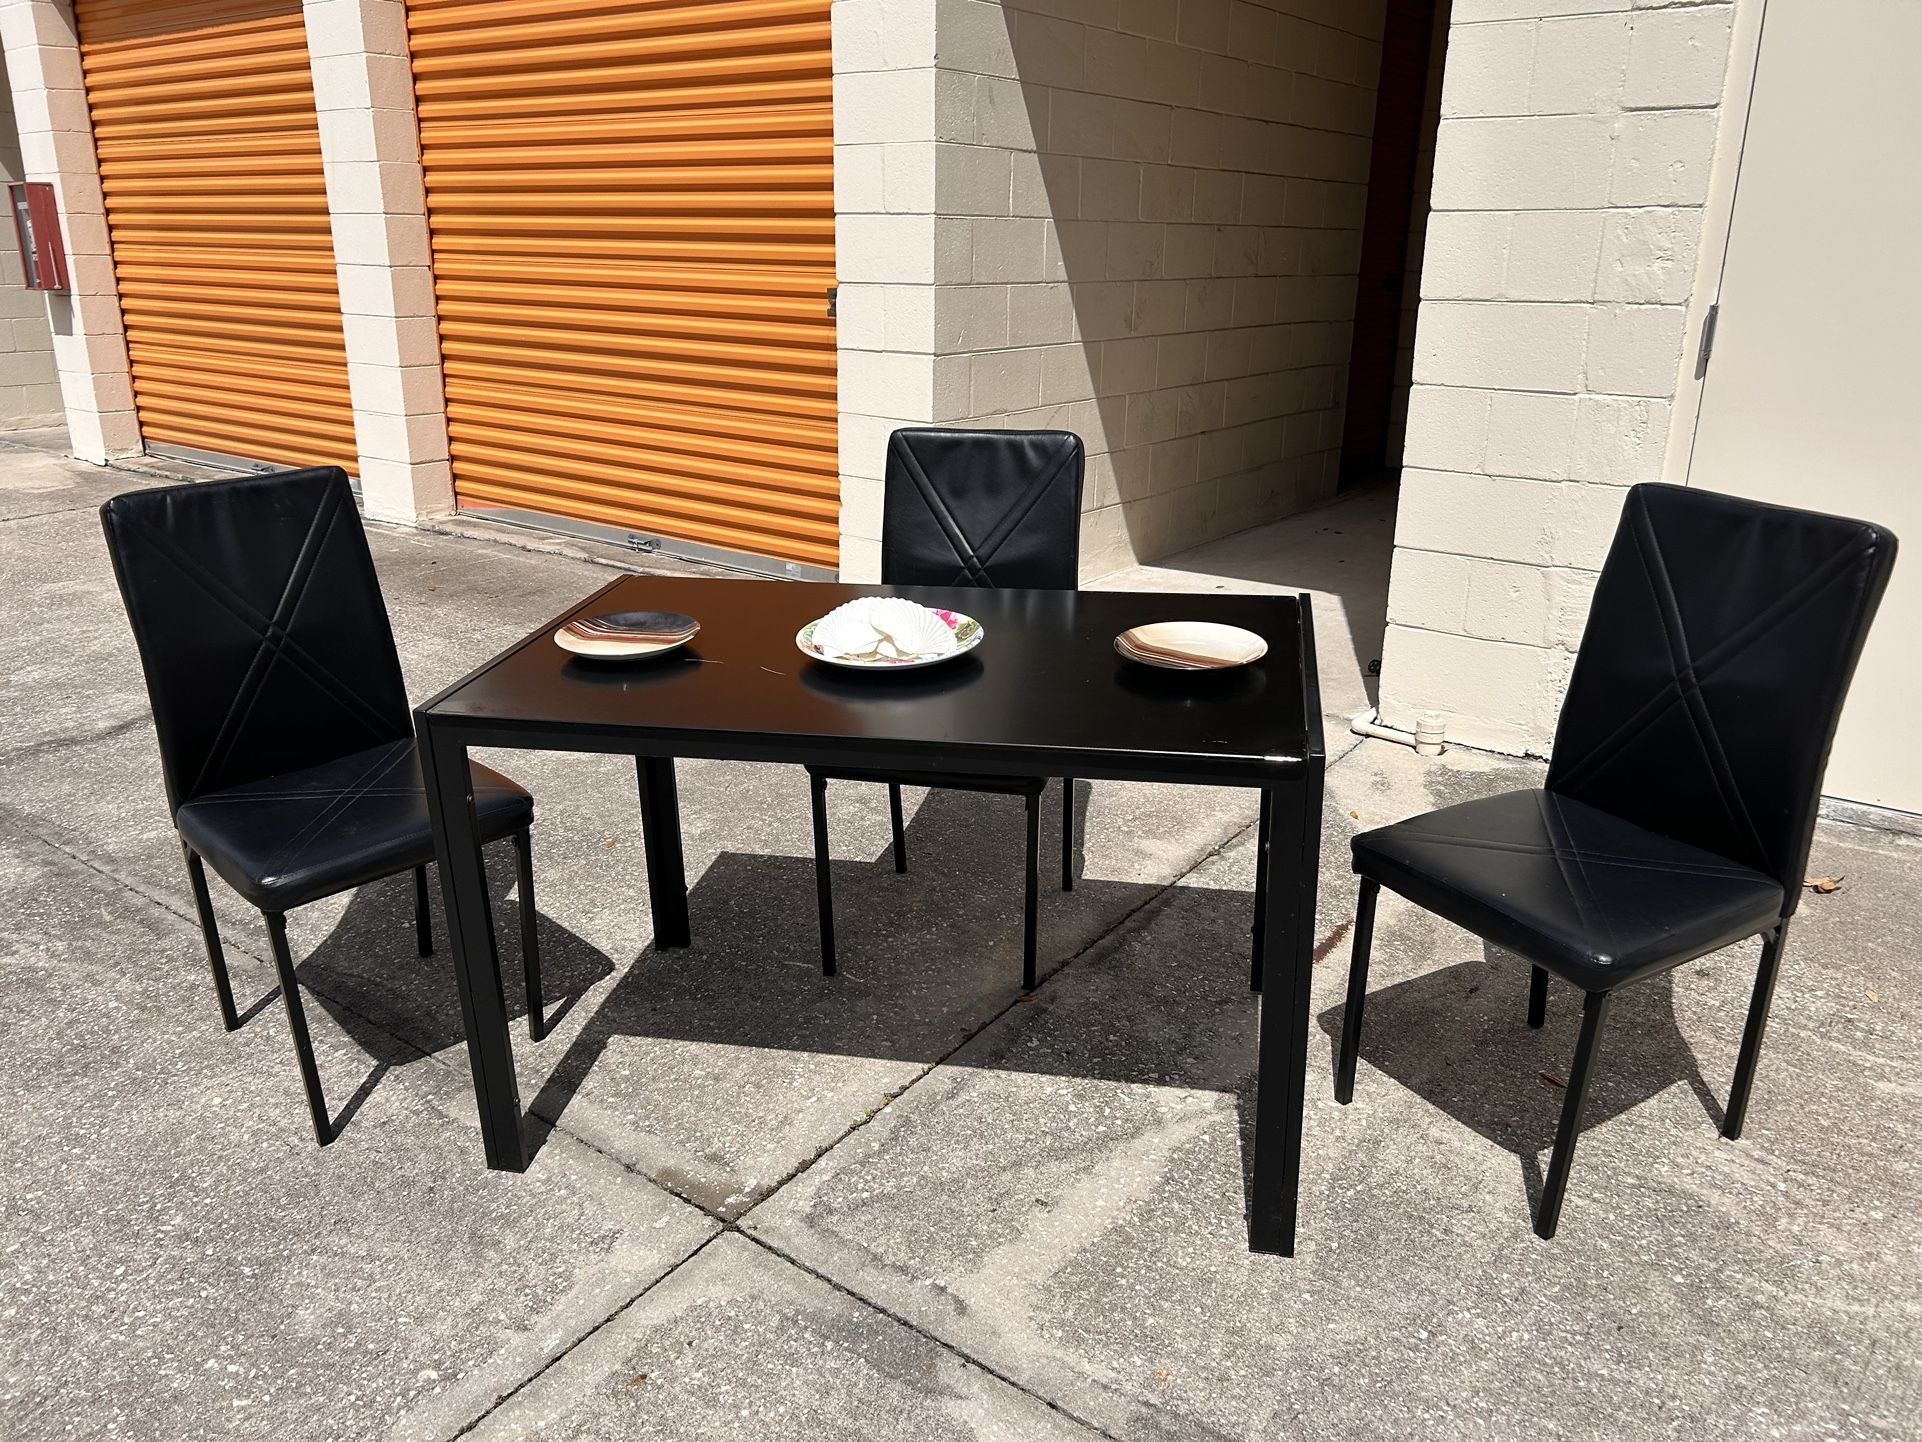 Dining Room Furniture Set $99 🎈🍀🎁🚚🎈 Dining And Kitchen Furniture, Table, Chair, Black Furniture, Glass Table, Kitchen Table, House, Storage Unit 